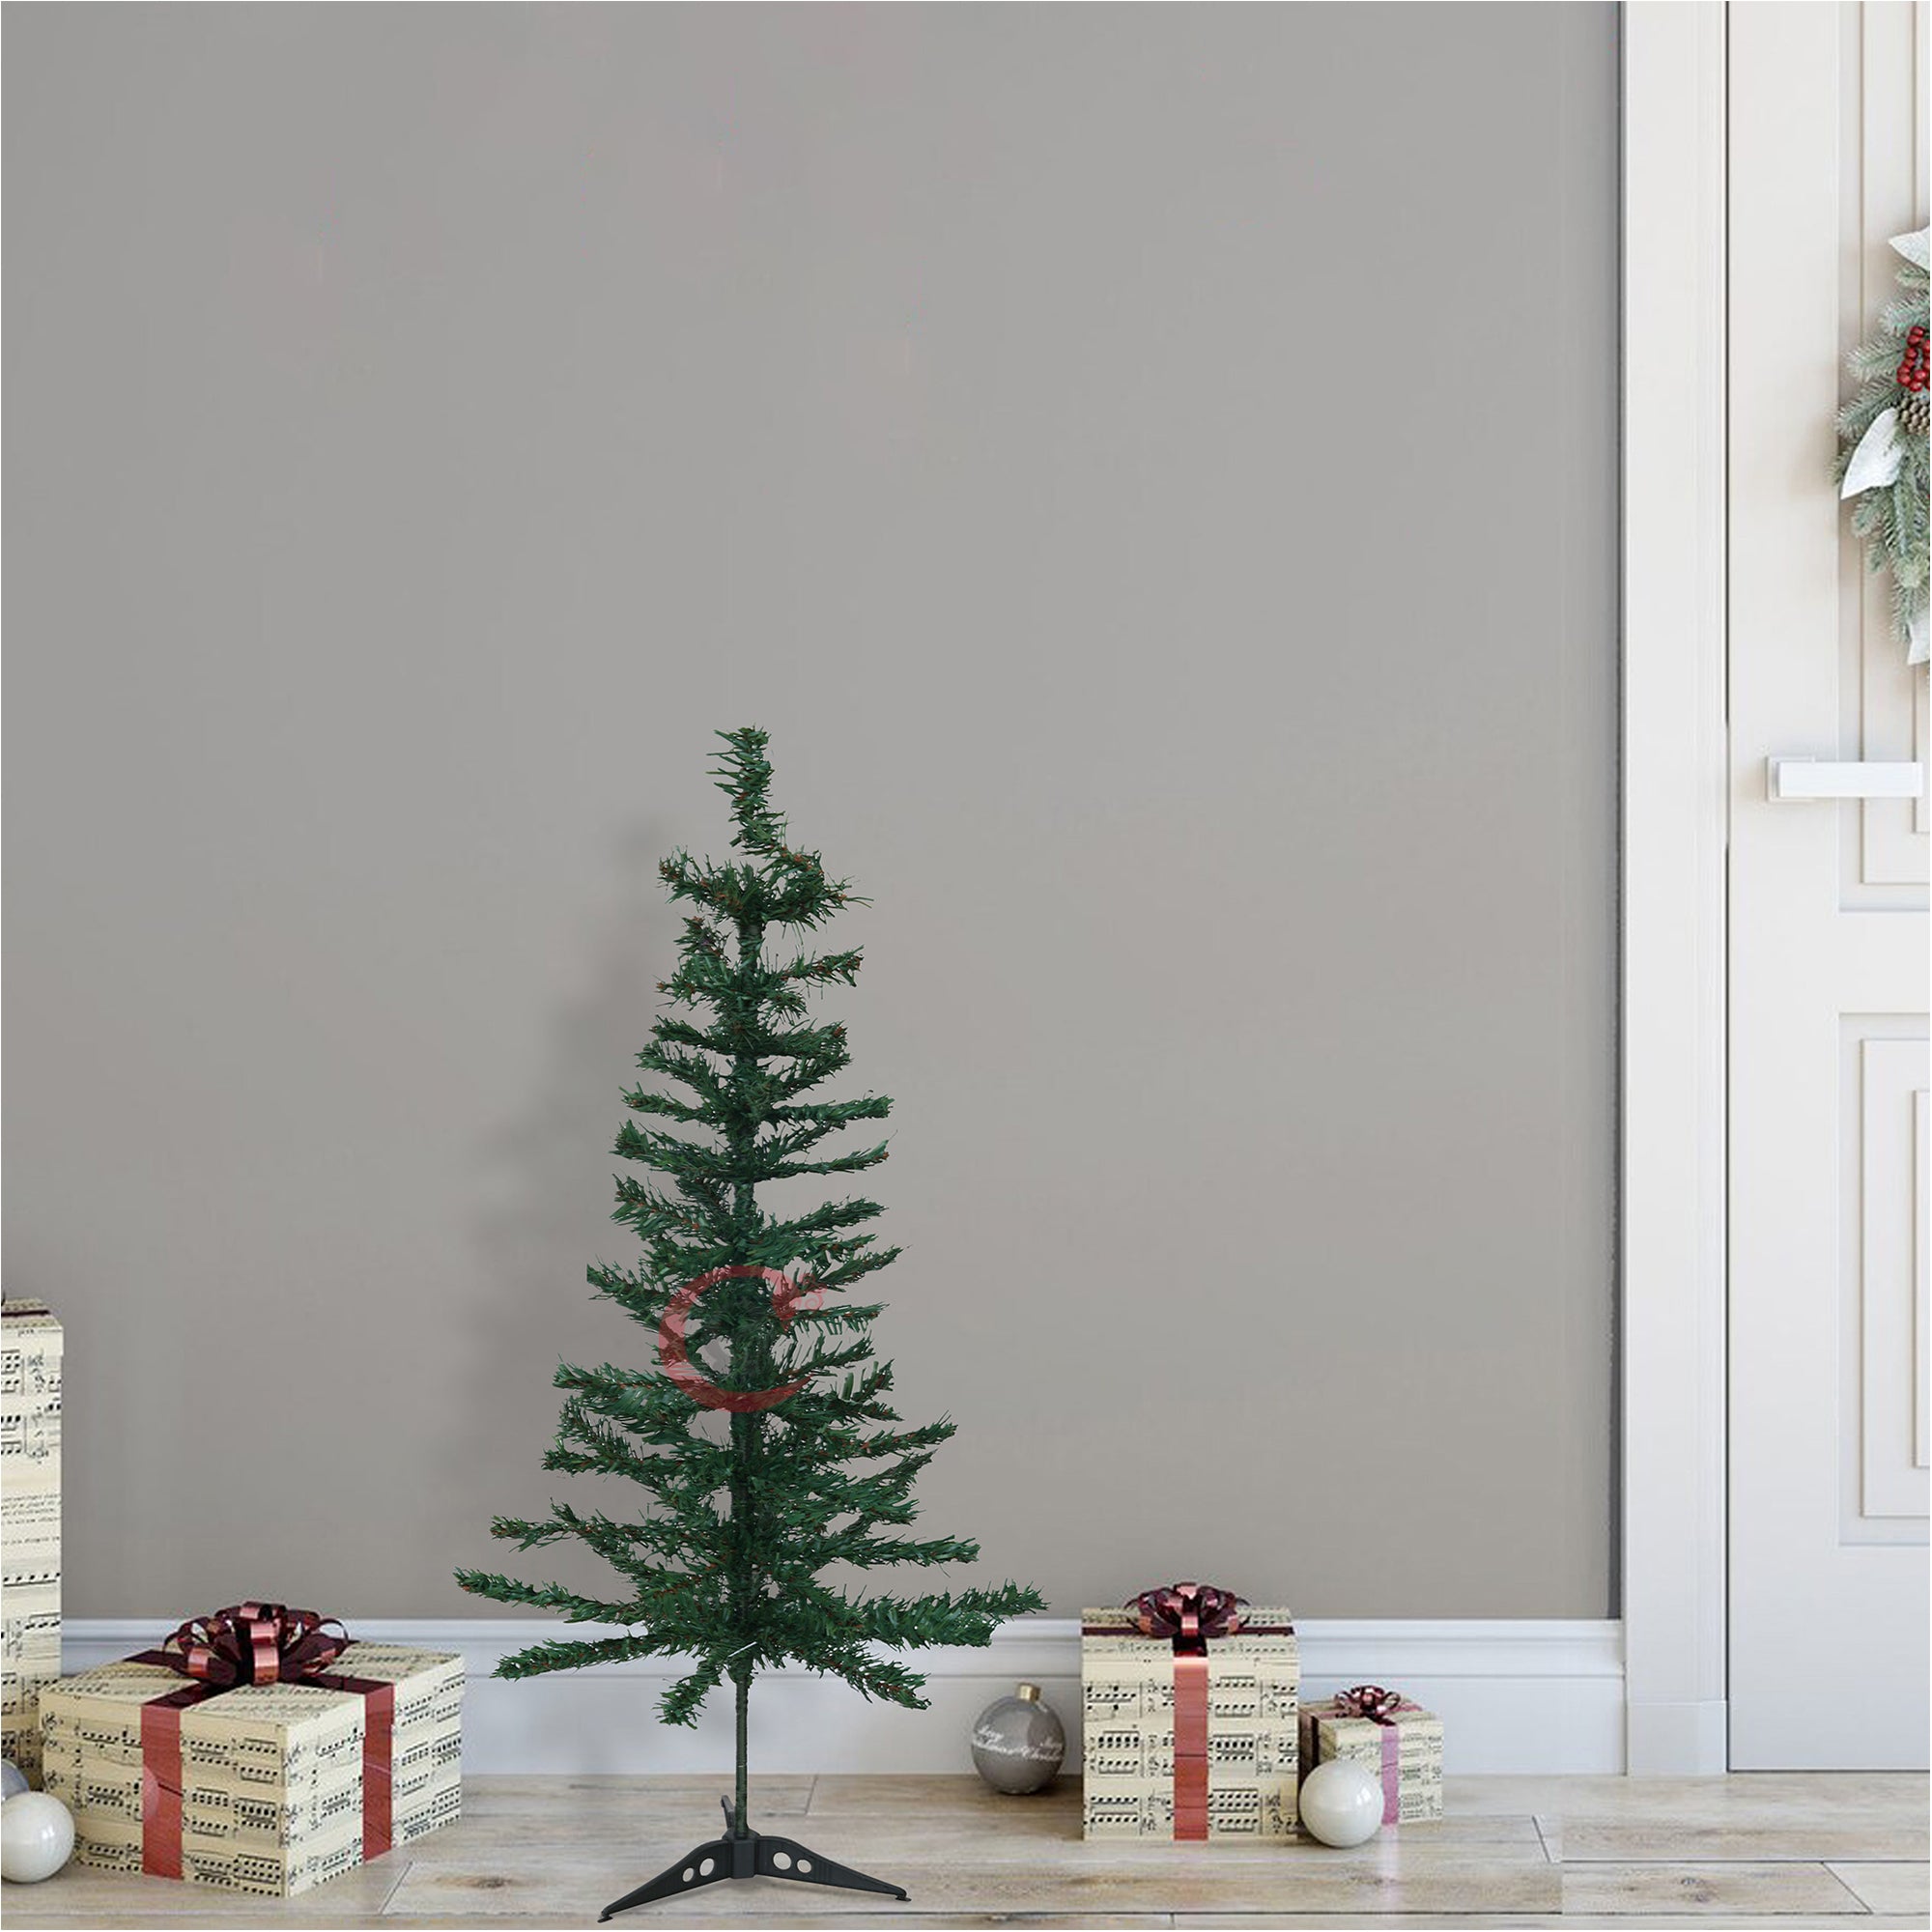 eCraftIndia 3 Feet Green Artificial Christmas Tree Xmas Pine Tree with Metal Stand - Xmas Tree for Indoor, Outdoor, Home, Living Room, Office, Church Decor - Merry Christmas Decoration Item